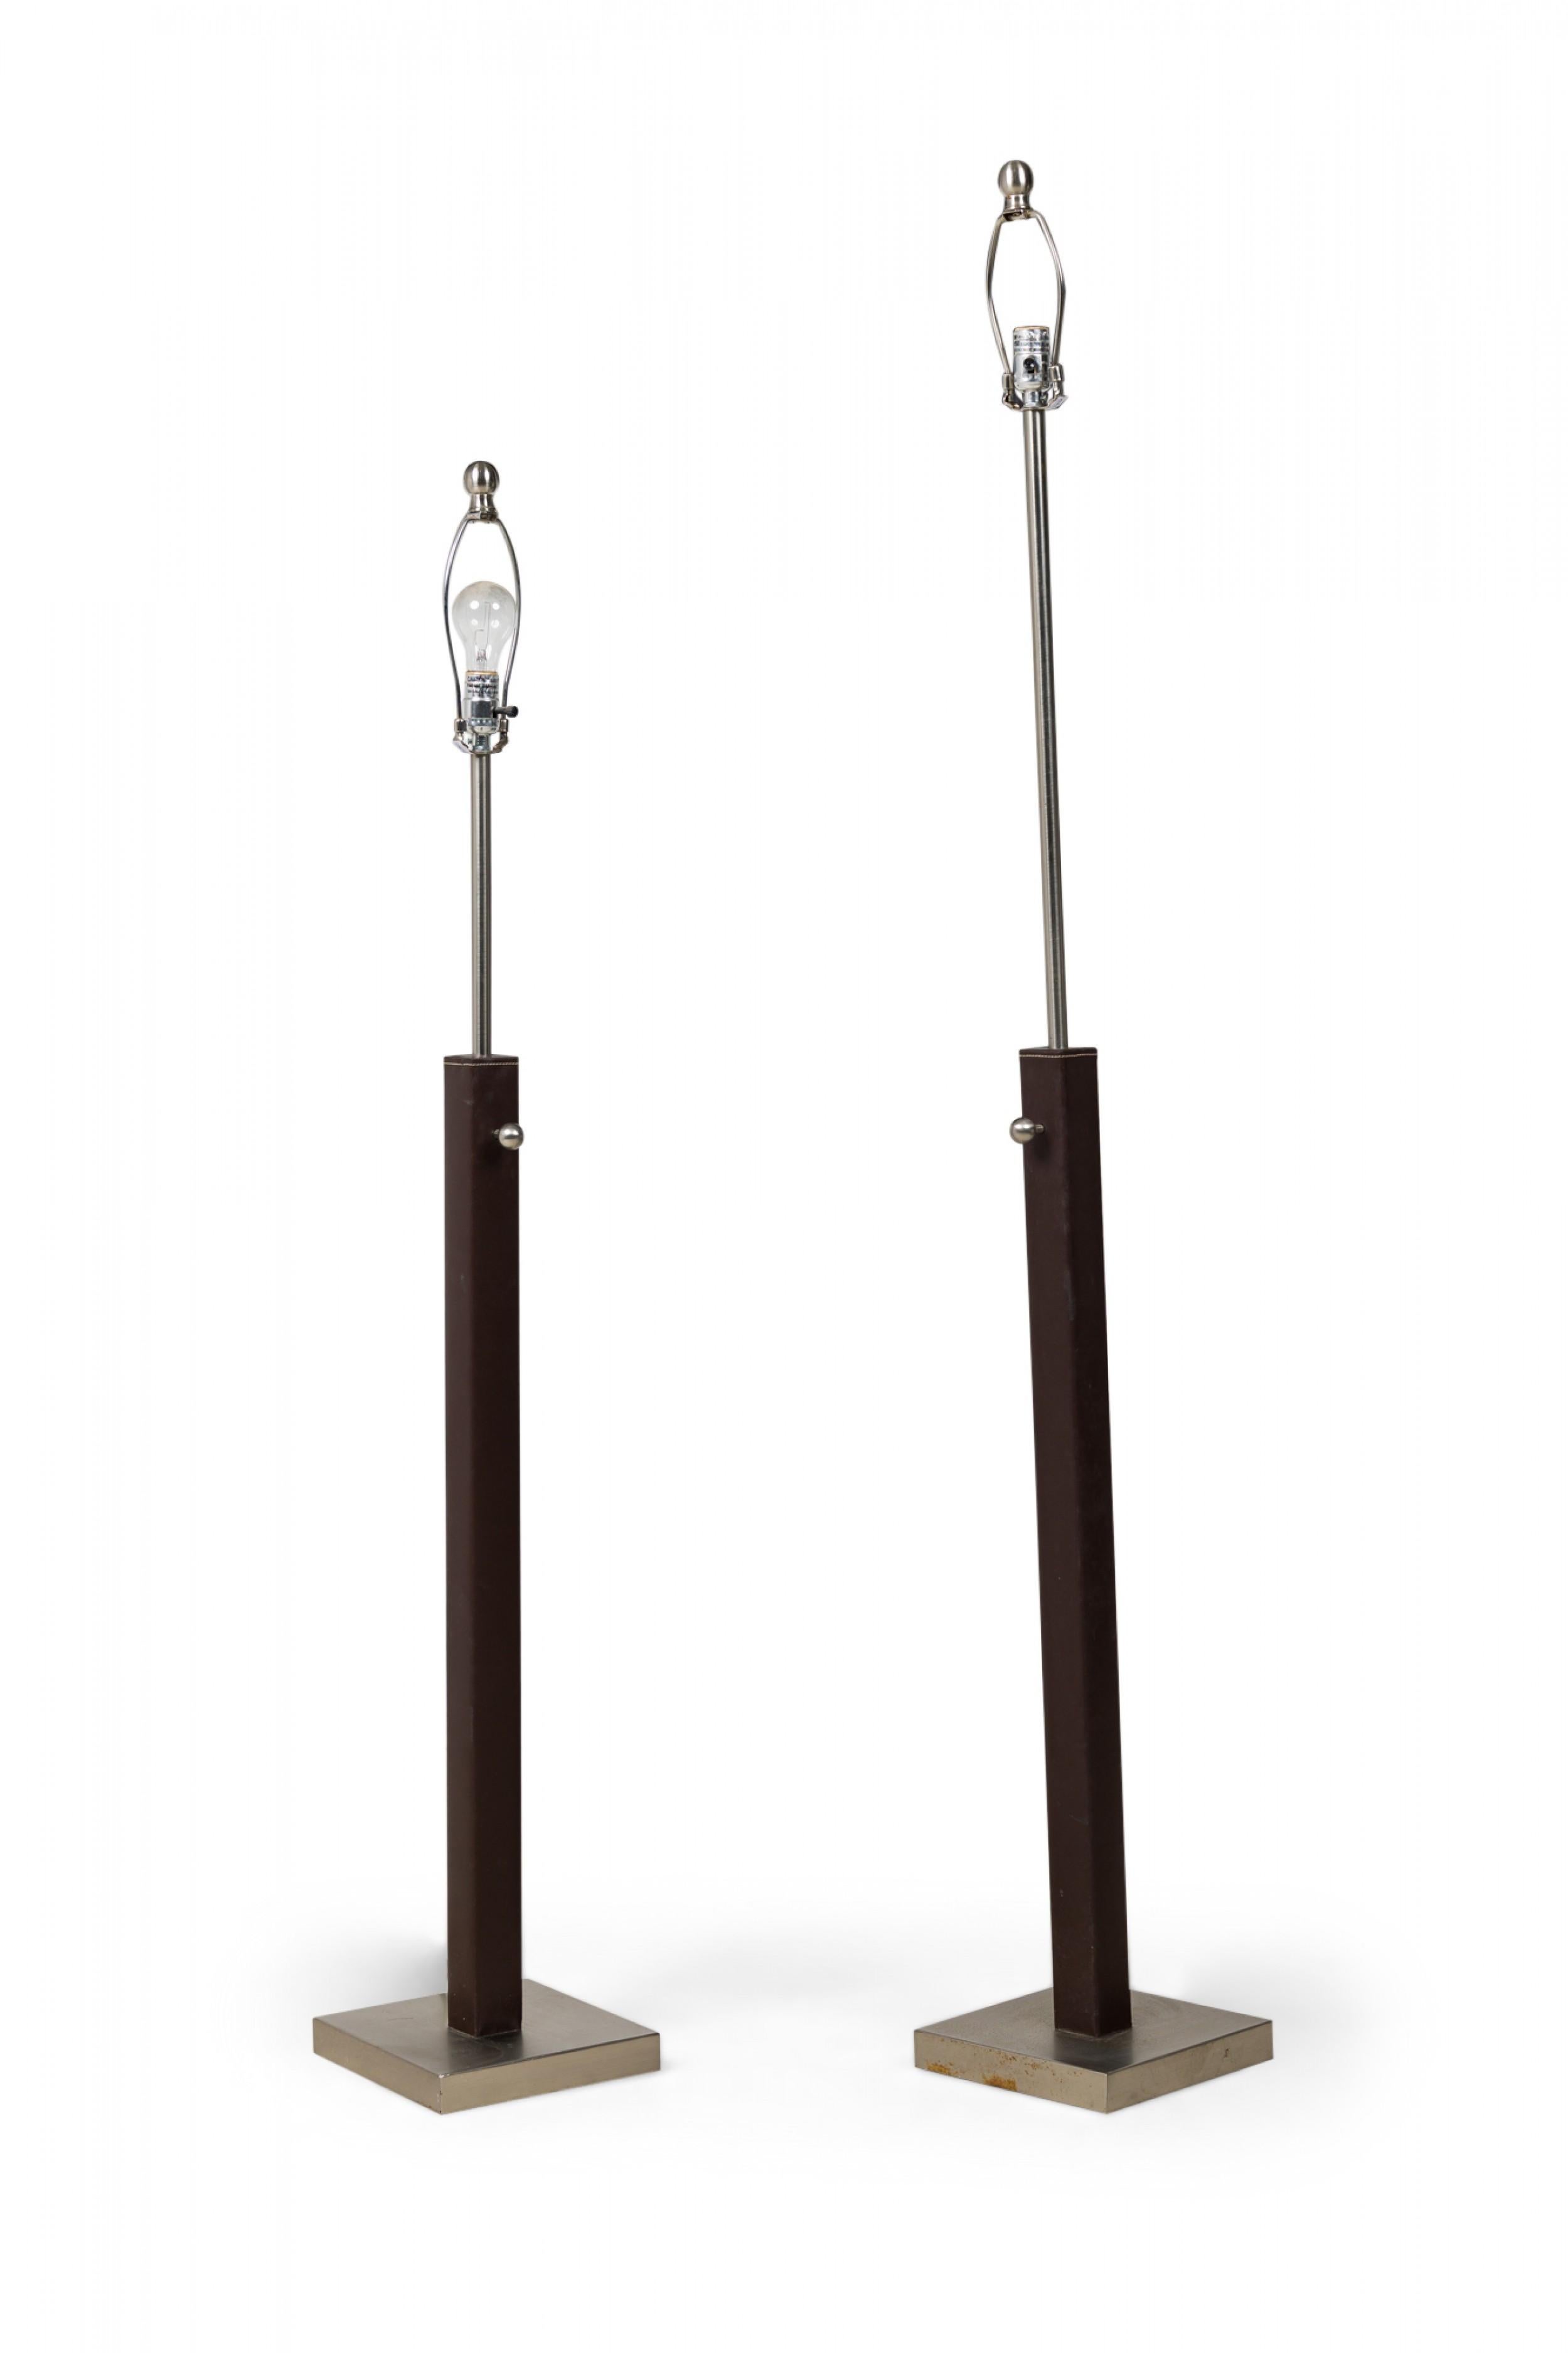 PAIR of French midcentury-style matched floor lamps in staggered heights, with brown stitched leather and brushed silver metal posts, resting on square brushed metal bases. (manner of Jacques Adnet)(PRICED AS PAIR).